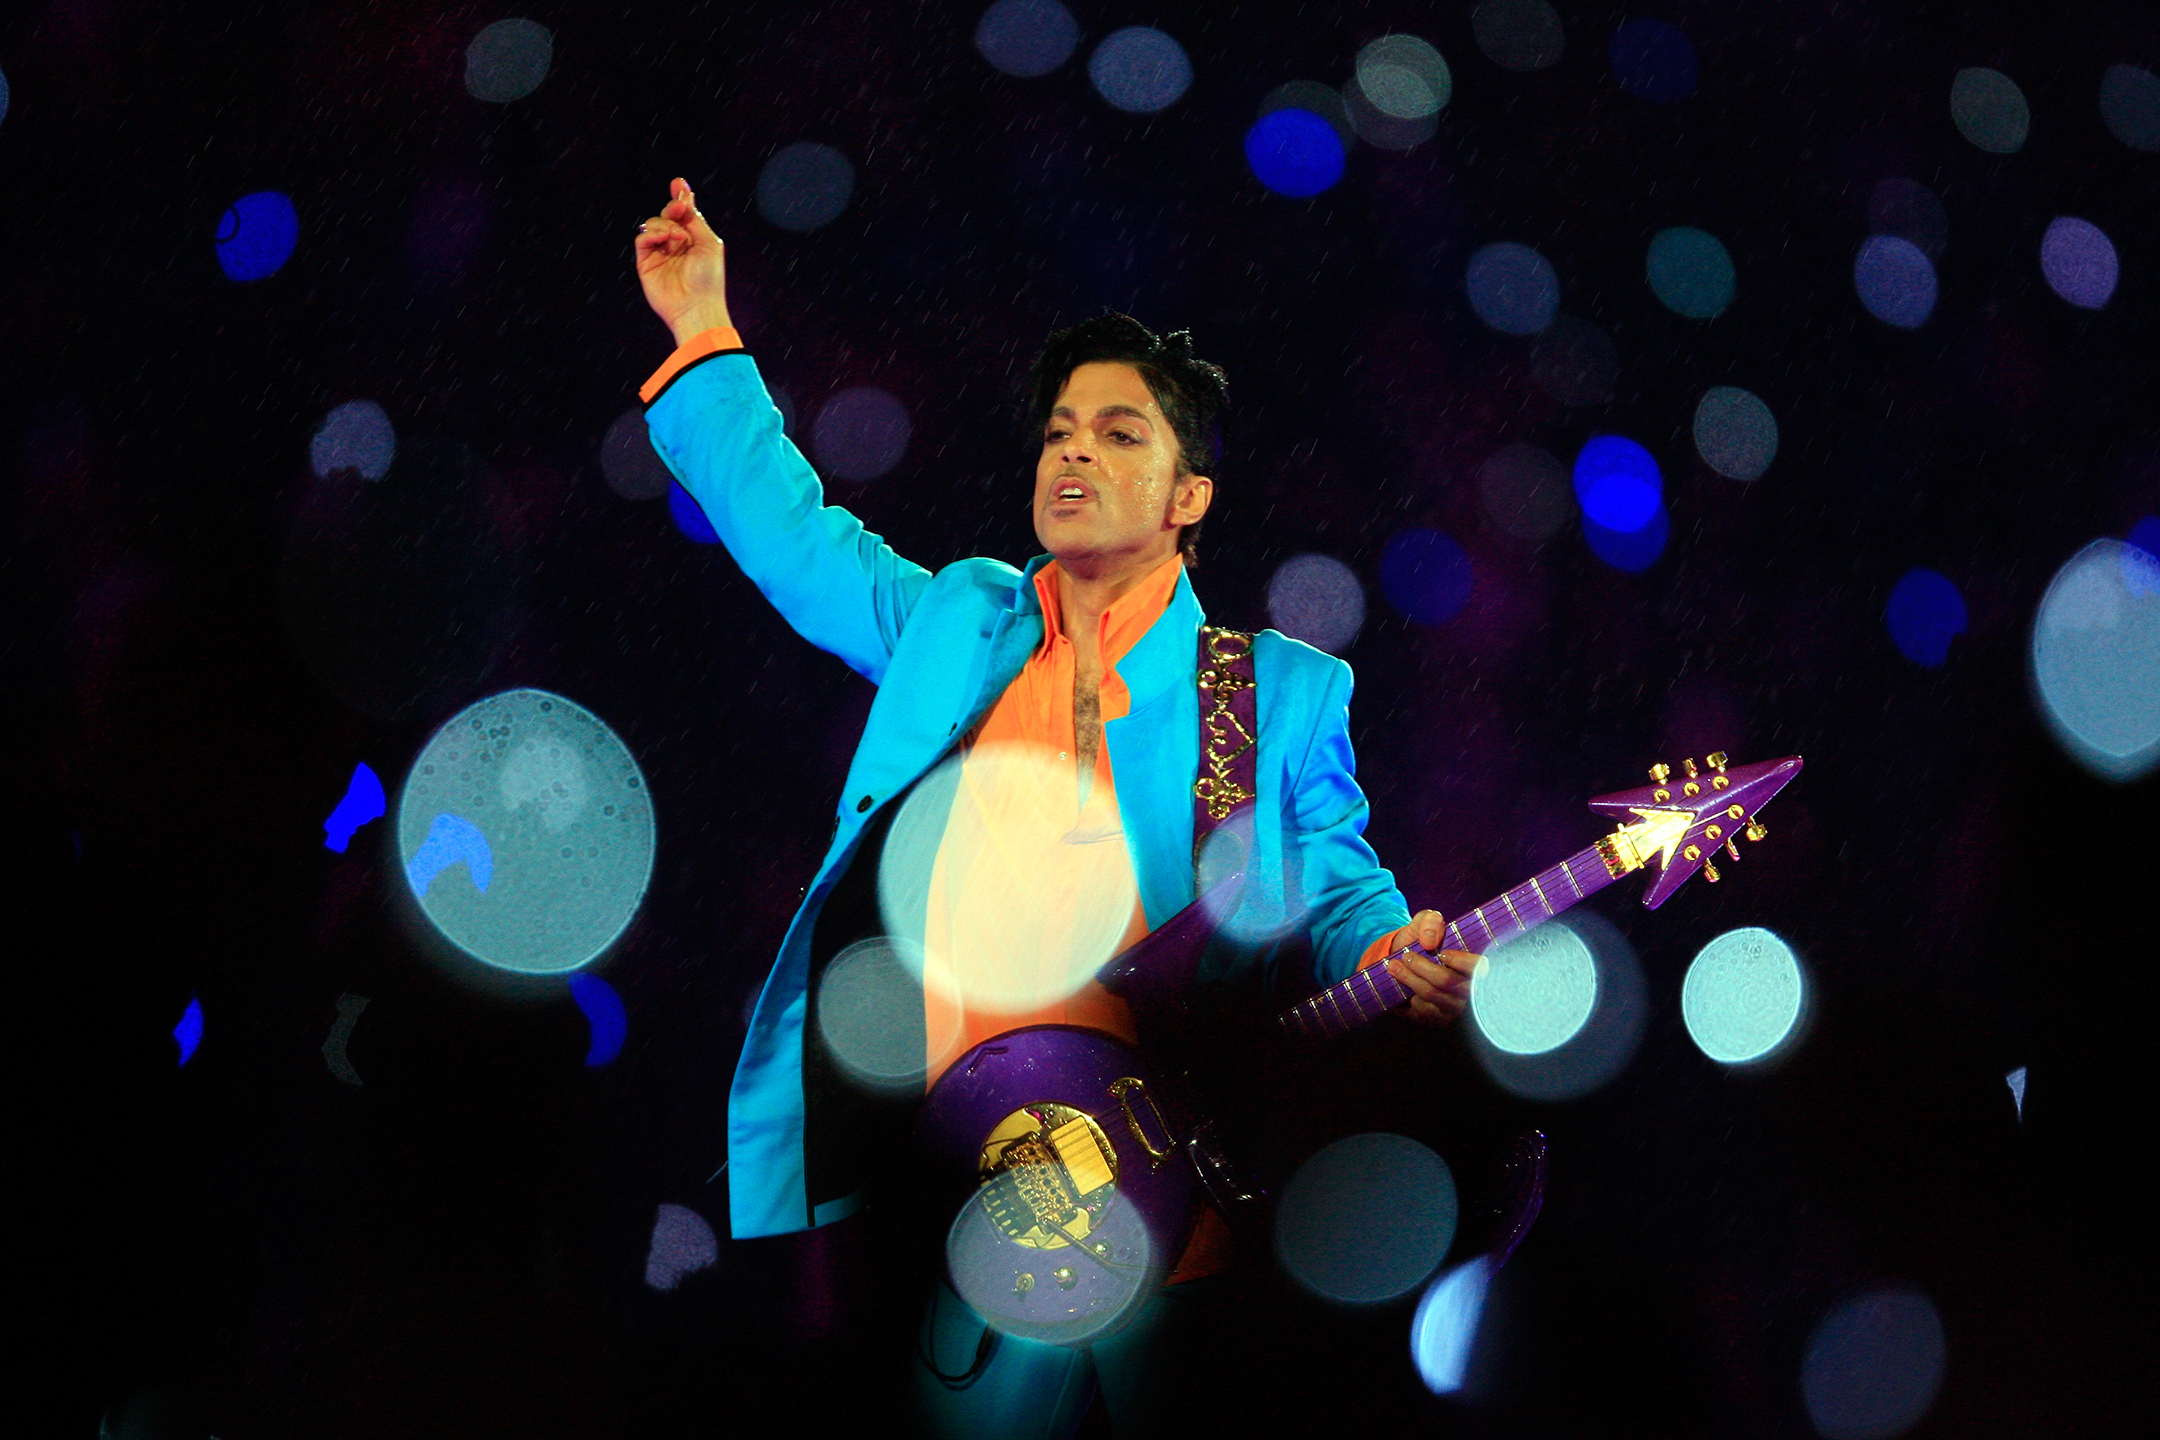 Prince raising his arms during a performance in the rain